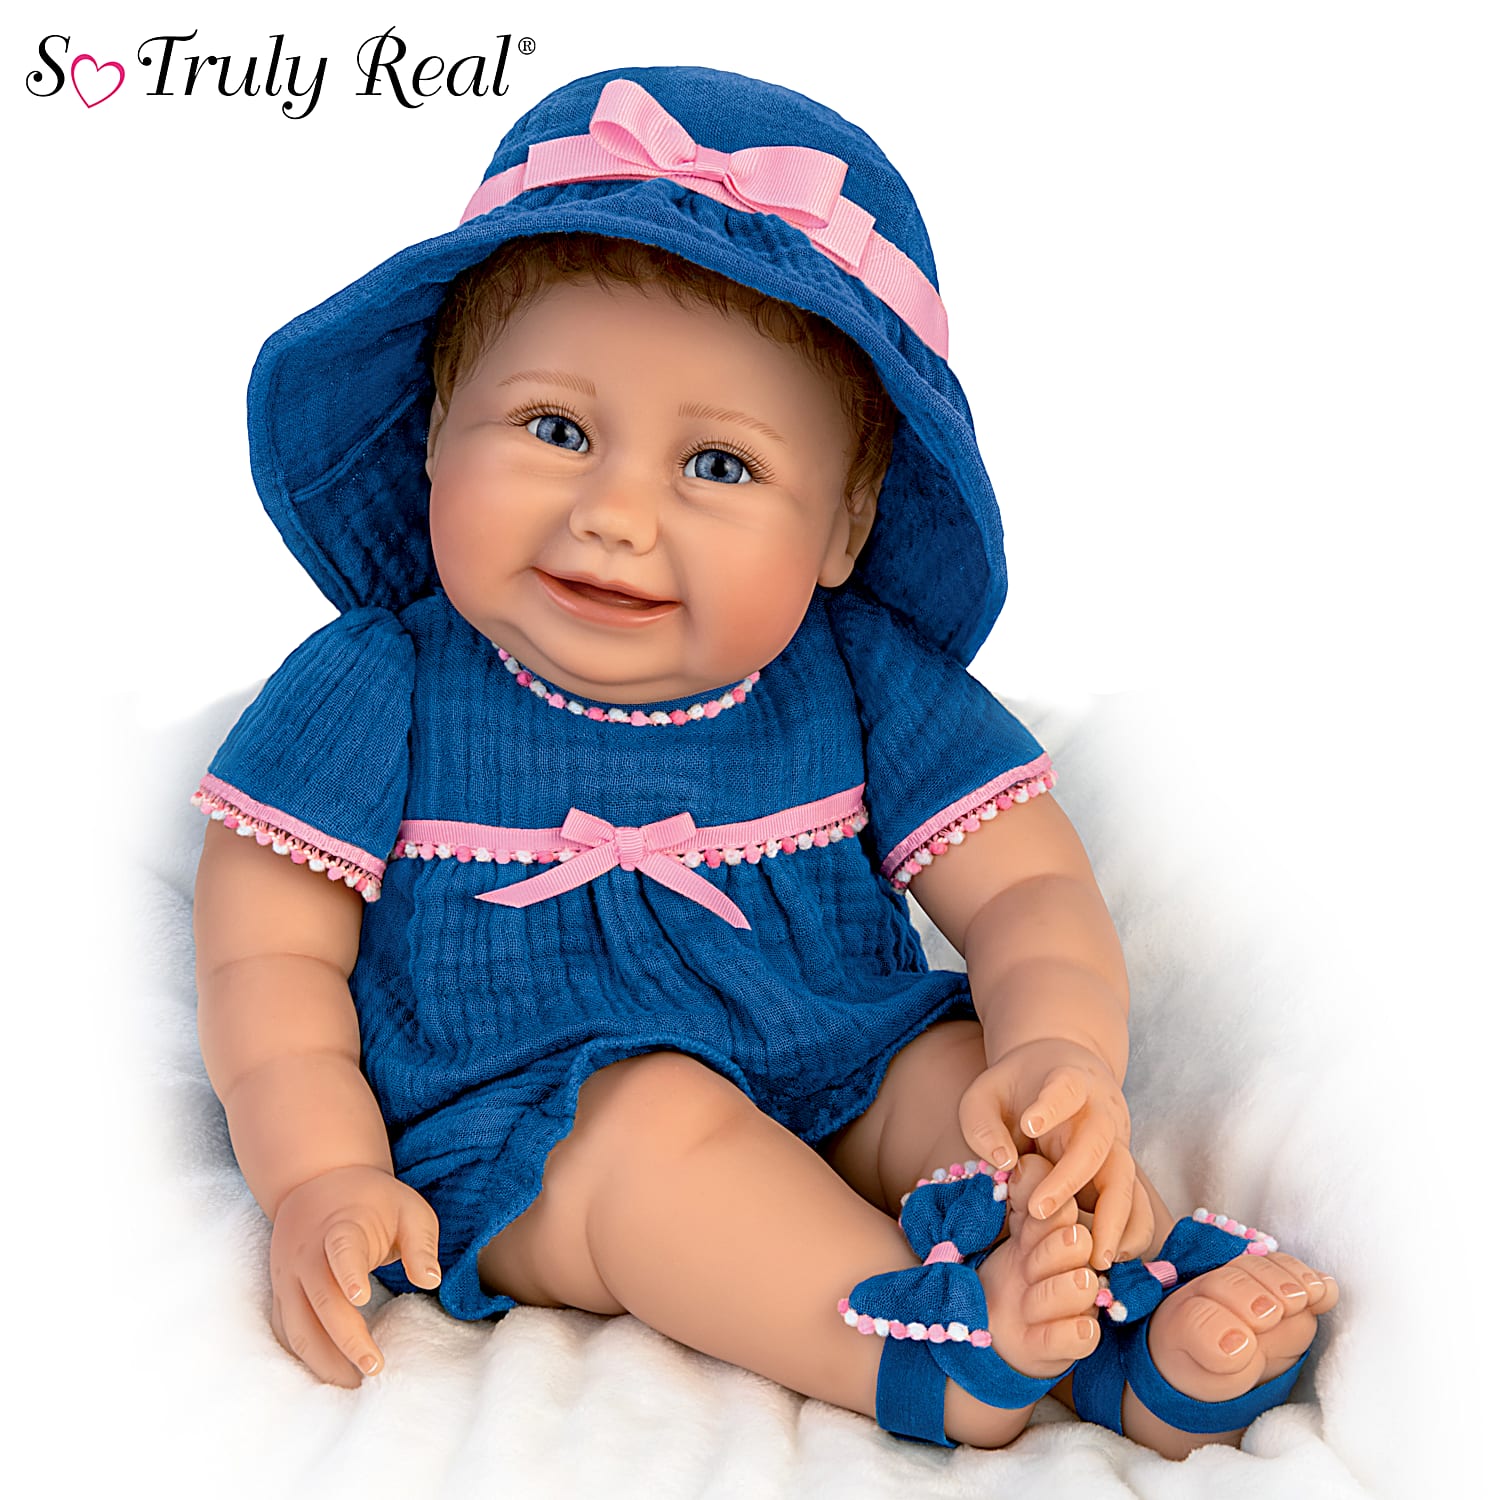 So Truly Real Summertime Sweetie Realistic Baby Doll With Hand-Rooted Hair  Featuring A Tassel-Trimmed